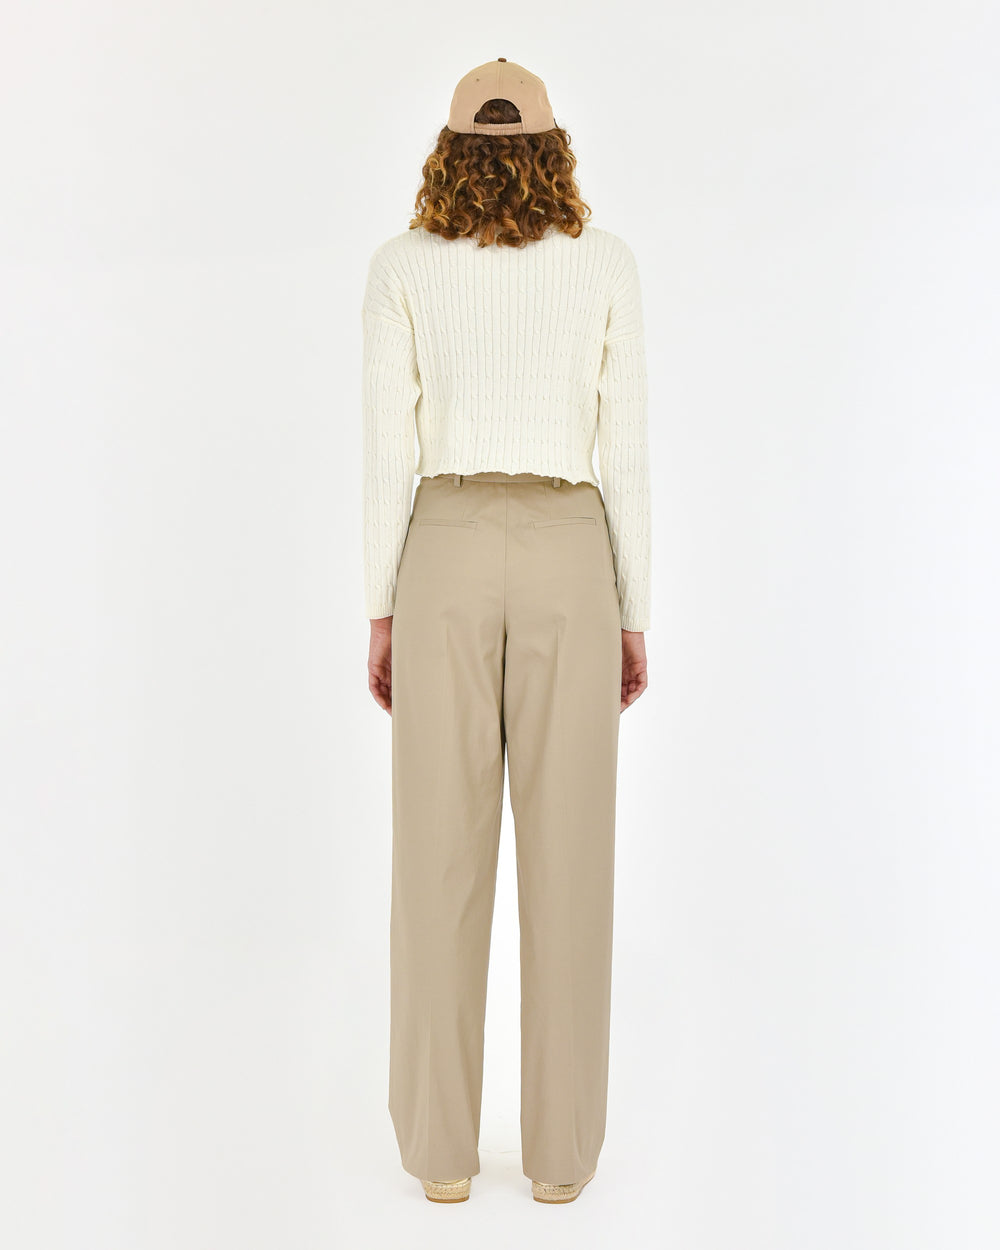 brown stretch cotton wide trousers